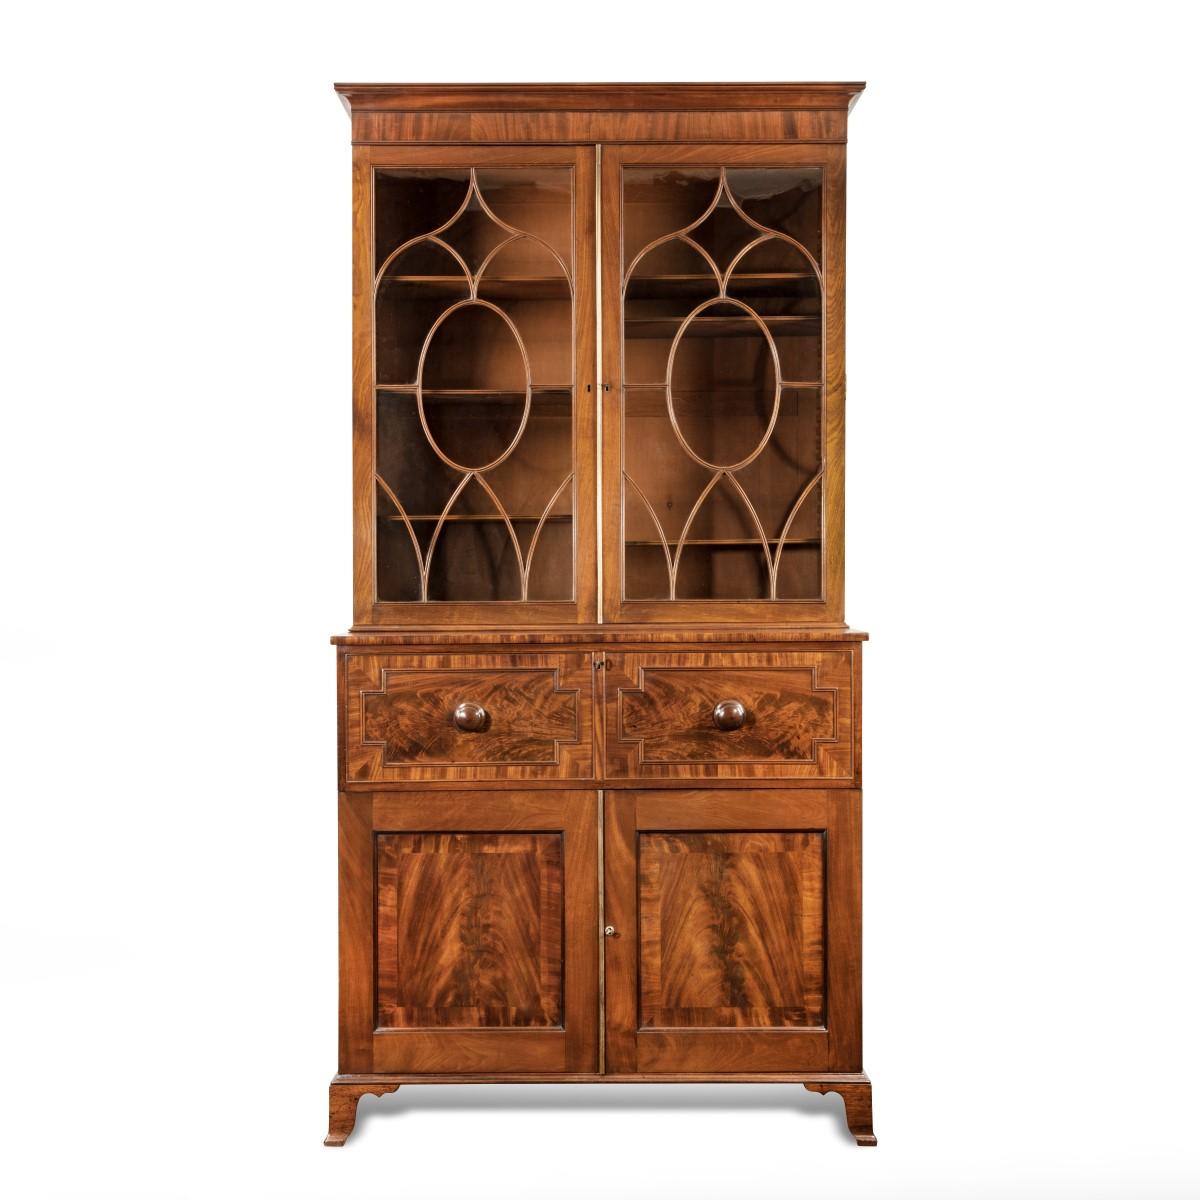 A late George III mahogany secretaire bookcase attributed to Gillows, of tall rectangular form with a secretaire drawer with a leather-inset fall front enclosing four shaped pigeonholes and small drawers flanking central compartment, all above two